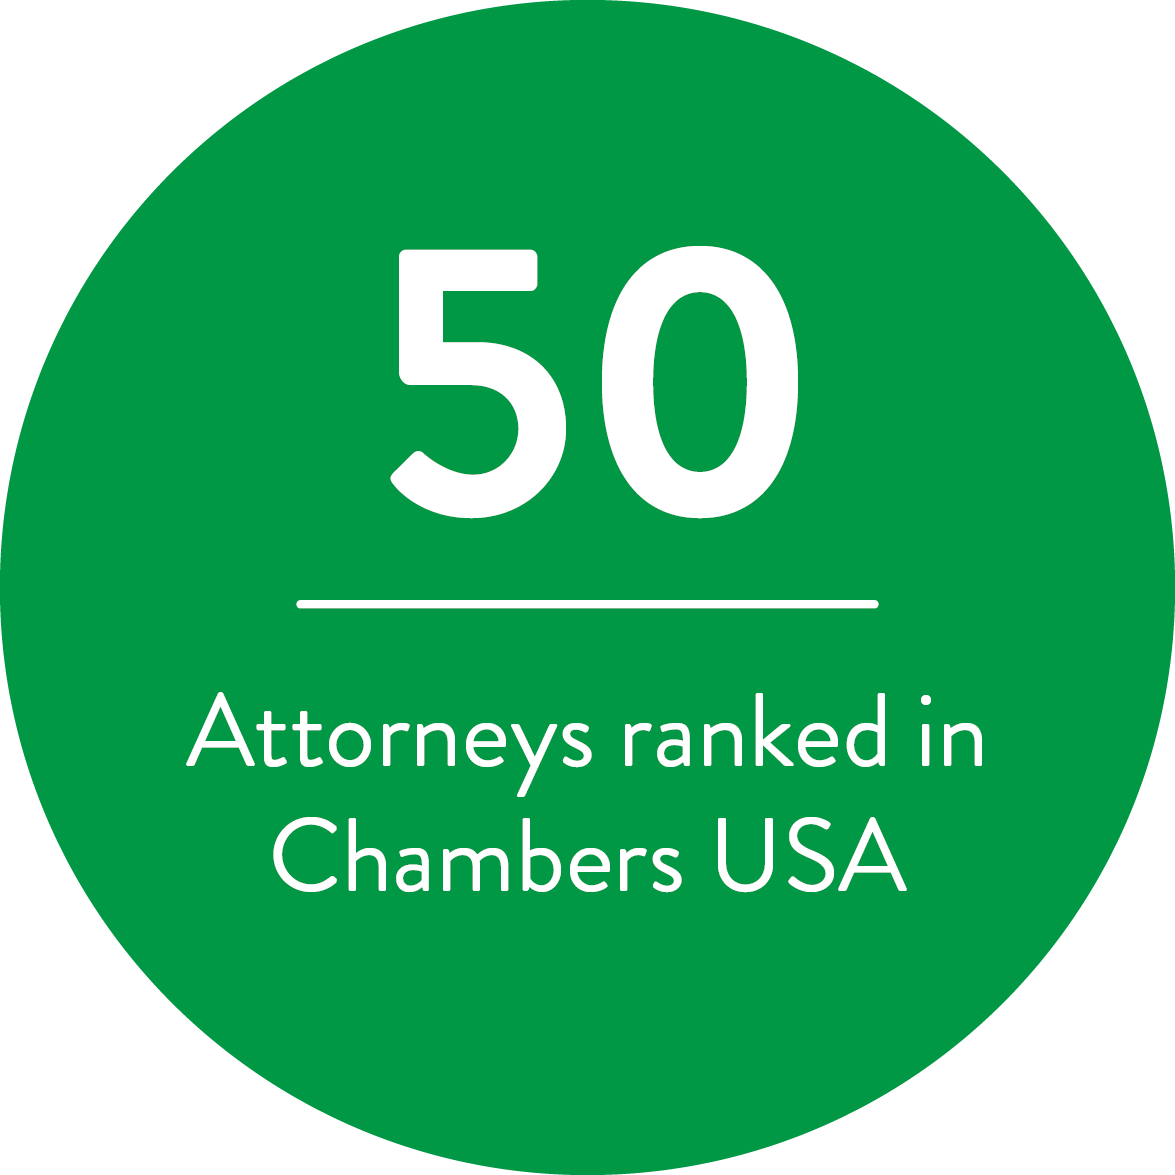 50 Attorneys ranked in Chambers USA